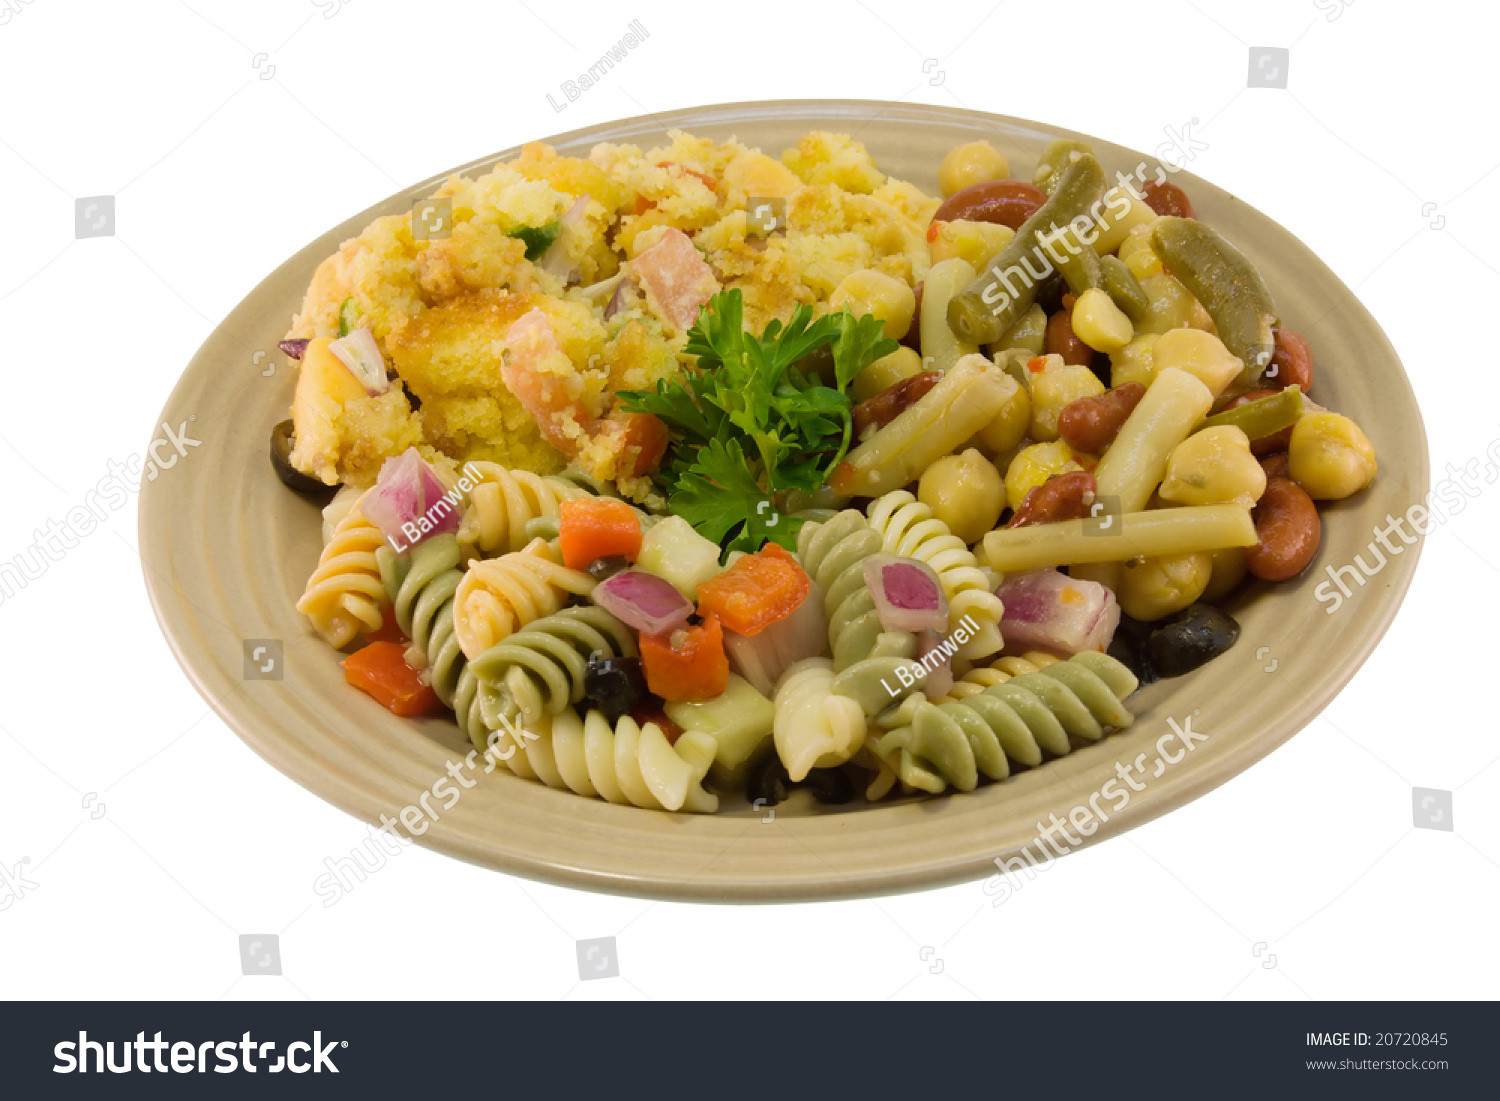 Vegetarian Pasta Salad With Beans
 Ve arian Plate With Pasta Salad Bean Salad And